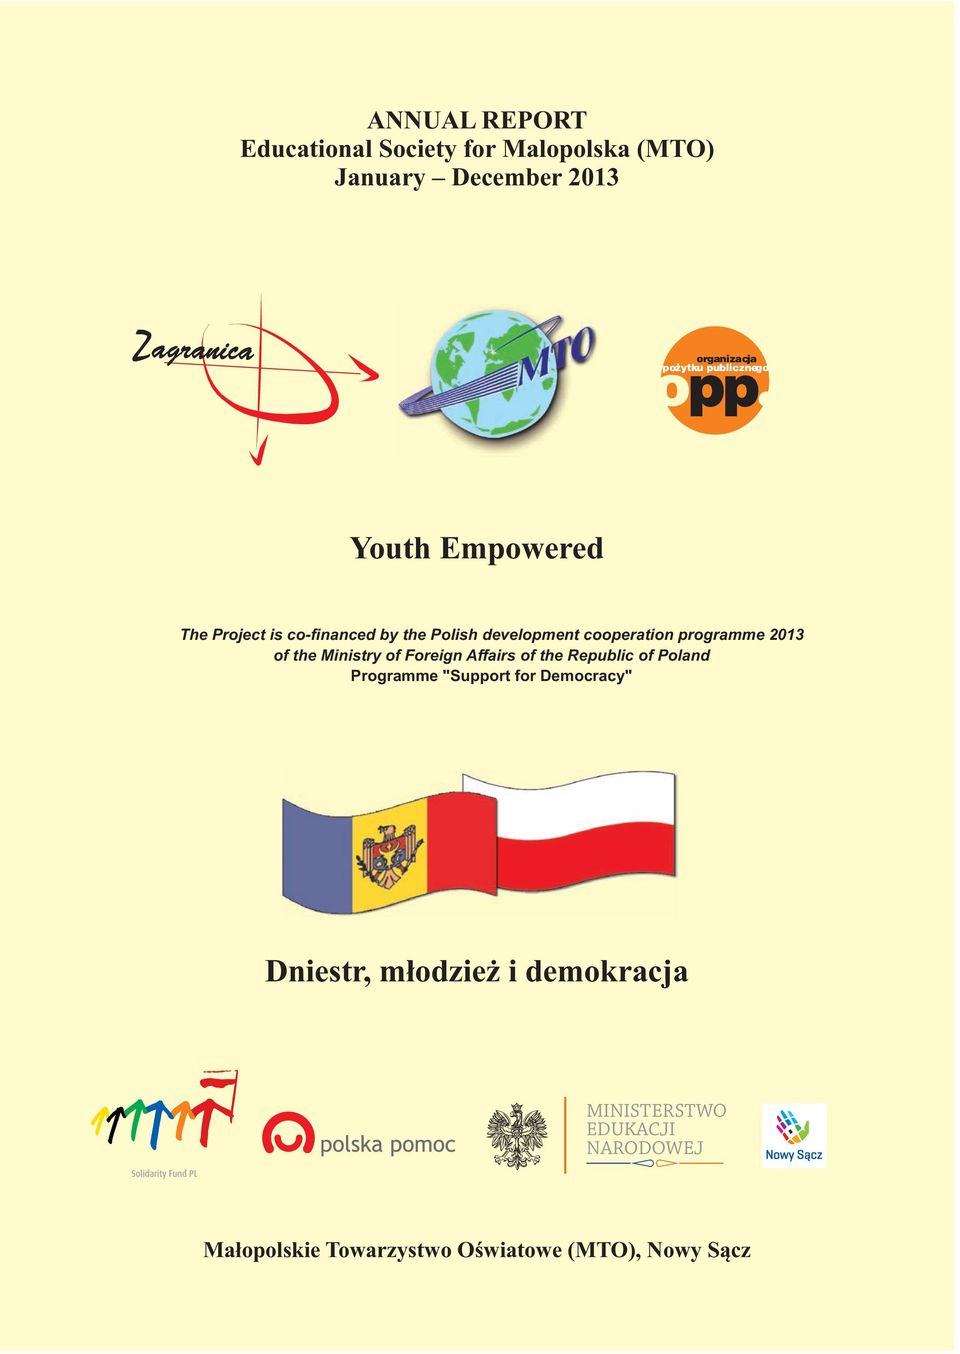 2013 of the Ministry of Foreign Affairs of the Republic of Poland Programme "Support for Democracy"